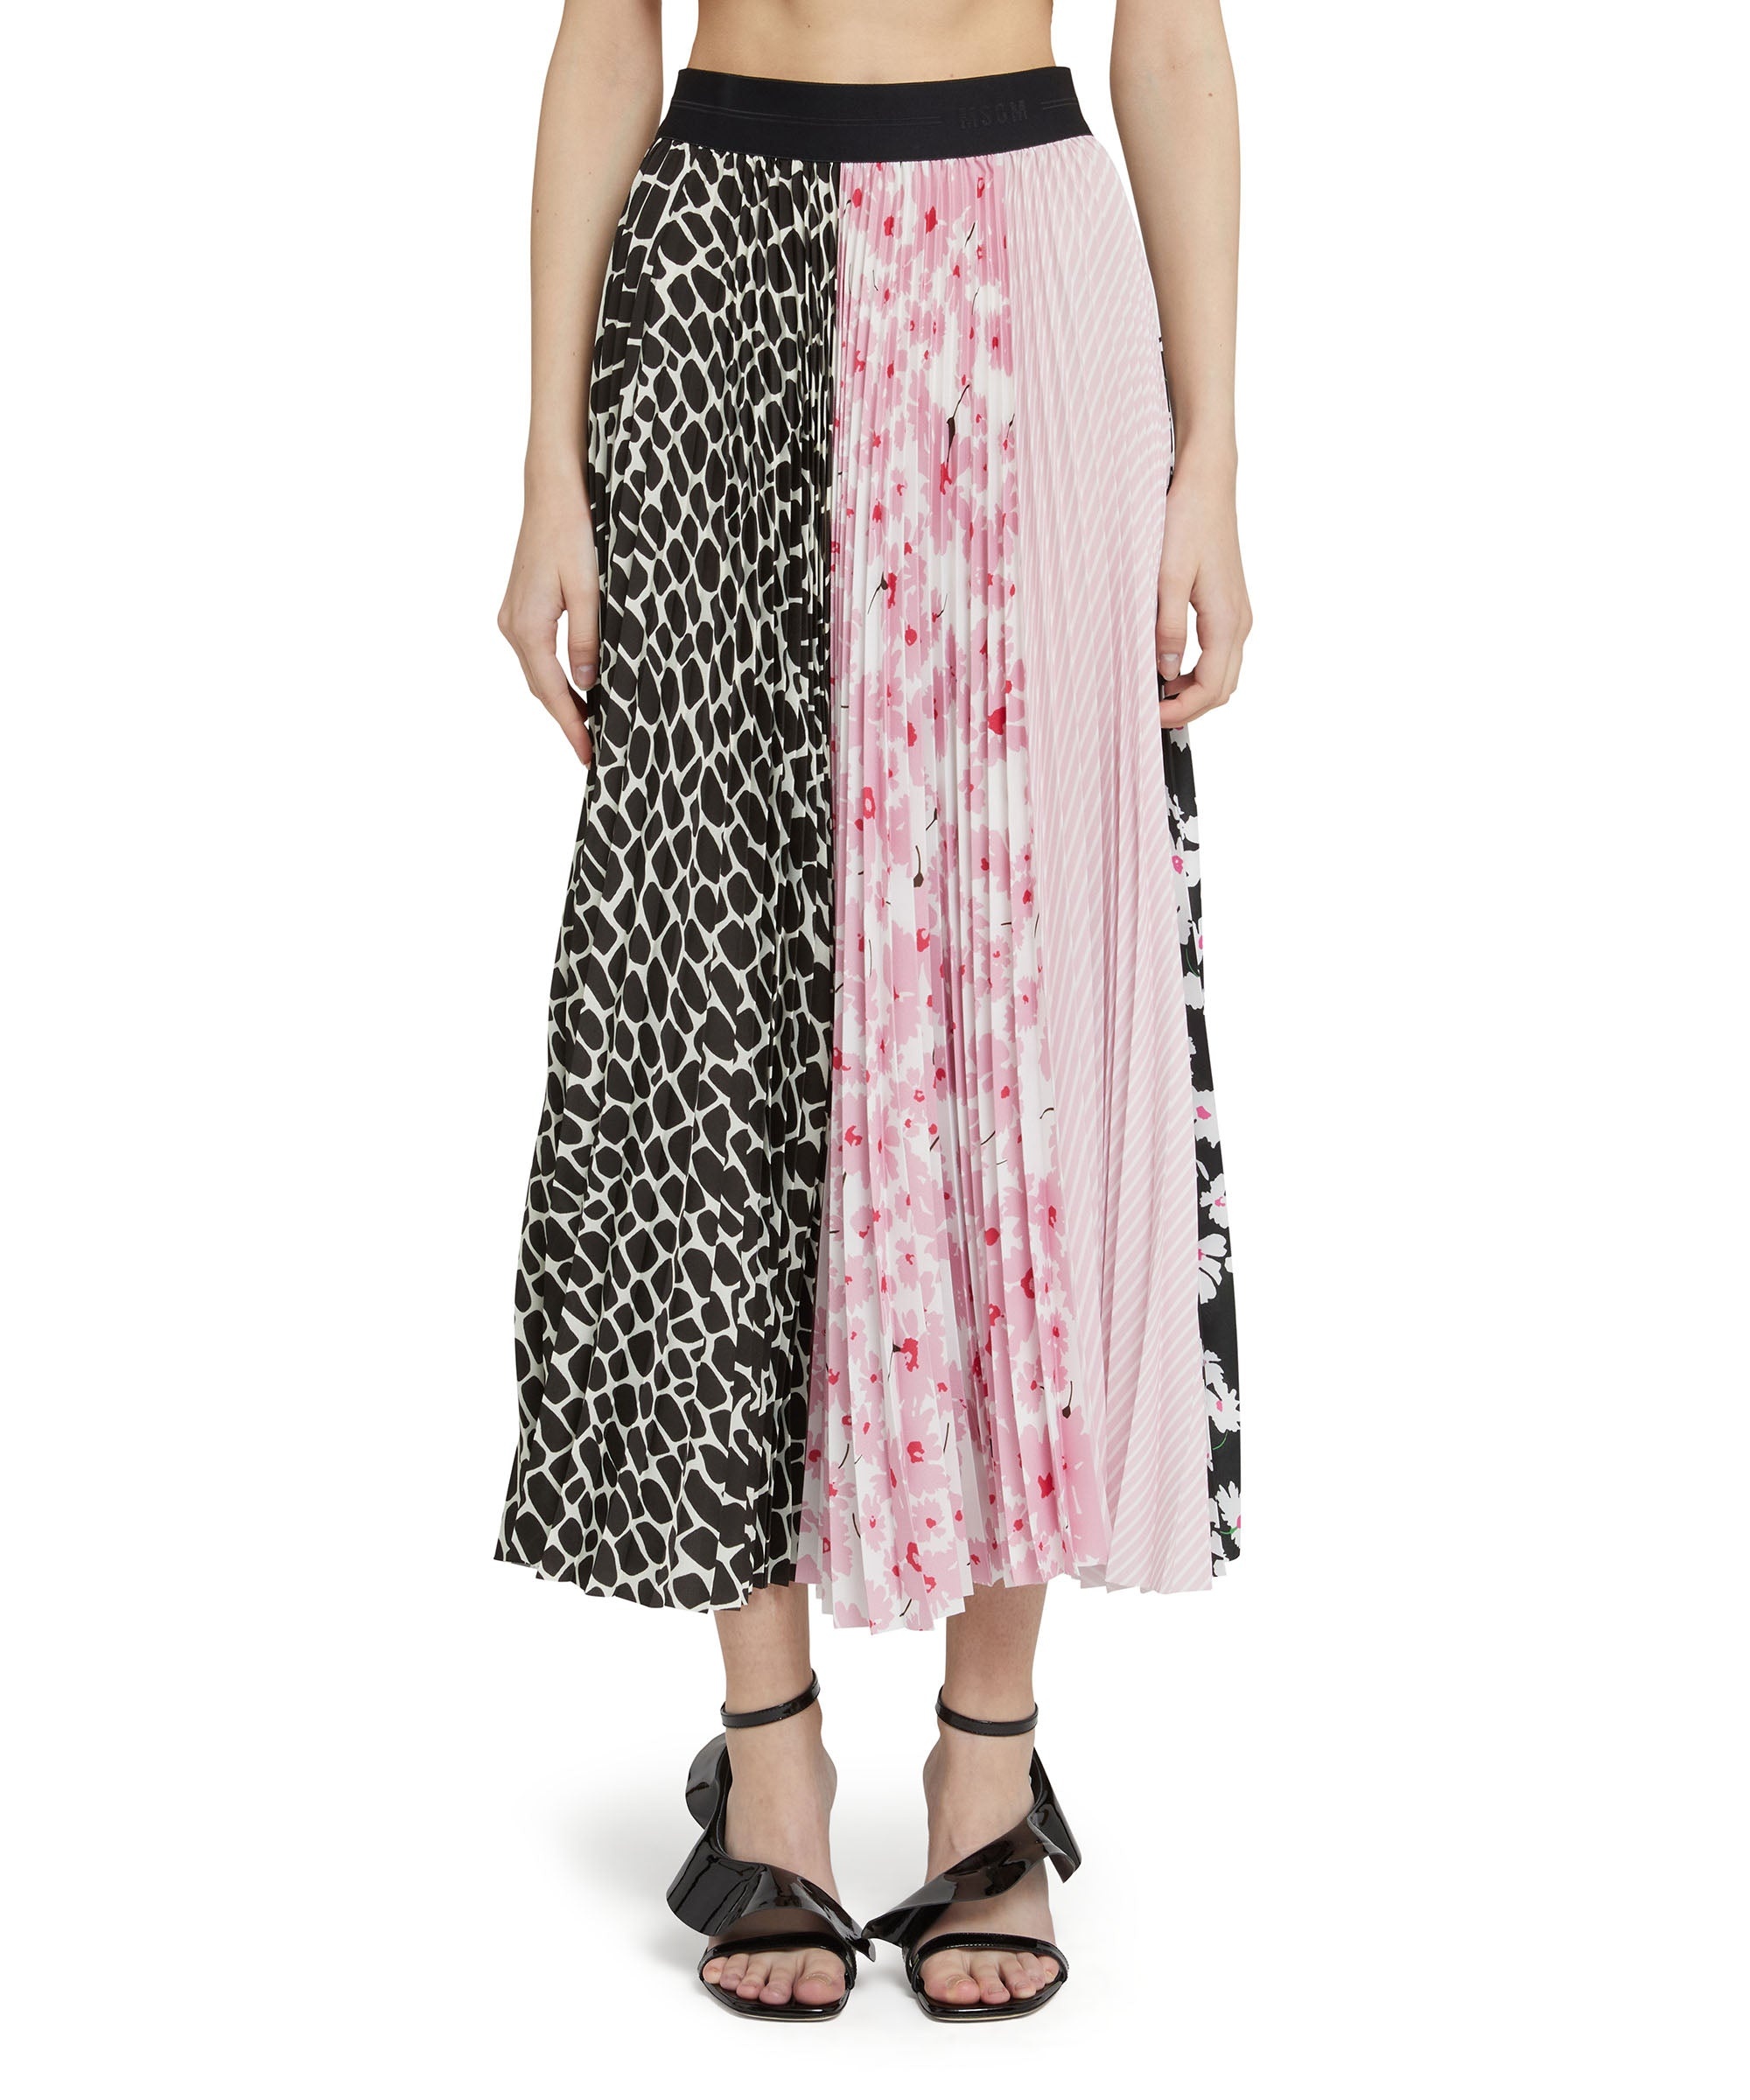 Long pleated skirt with patchwork print and elasticized waistband - 2